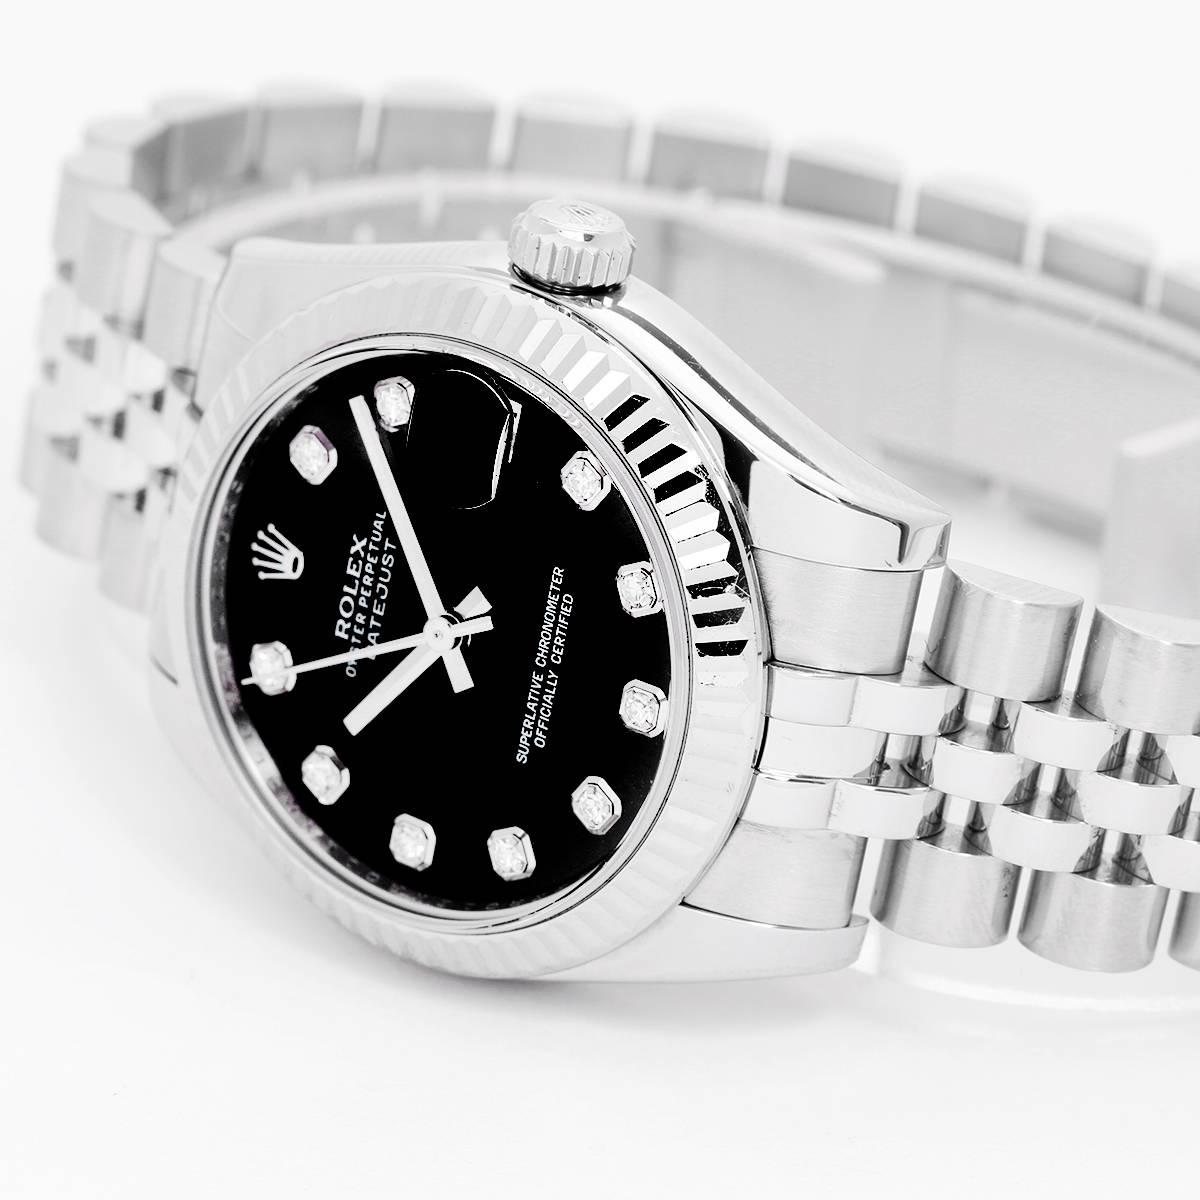 Rolex Datejust Midsize Men's/Ladies Steel Watch 178274 -  Automatic winding; 31 jewel; sapphire crystal. Stainless steel case with 18k white gold fluted bezel (31mm diameter). Factory black diamond dial. Stainless steel Jubilee bracelet. Pre-owned